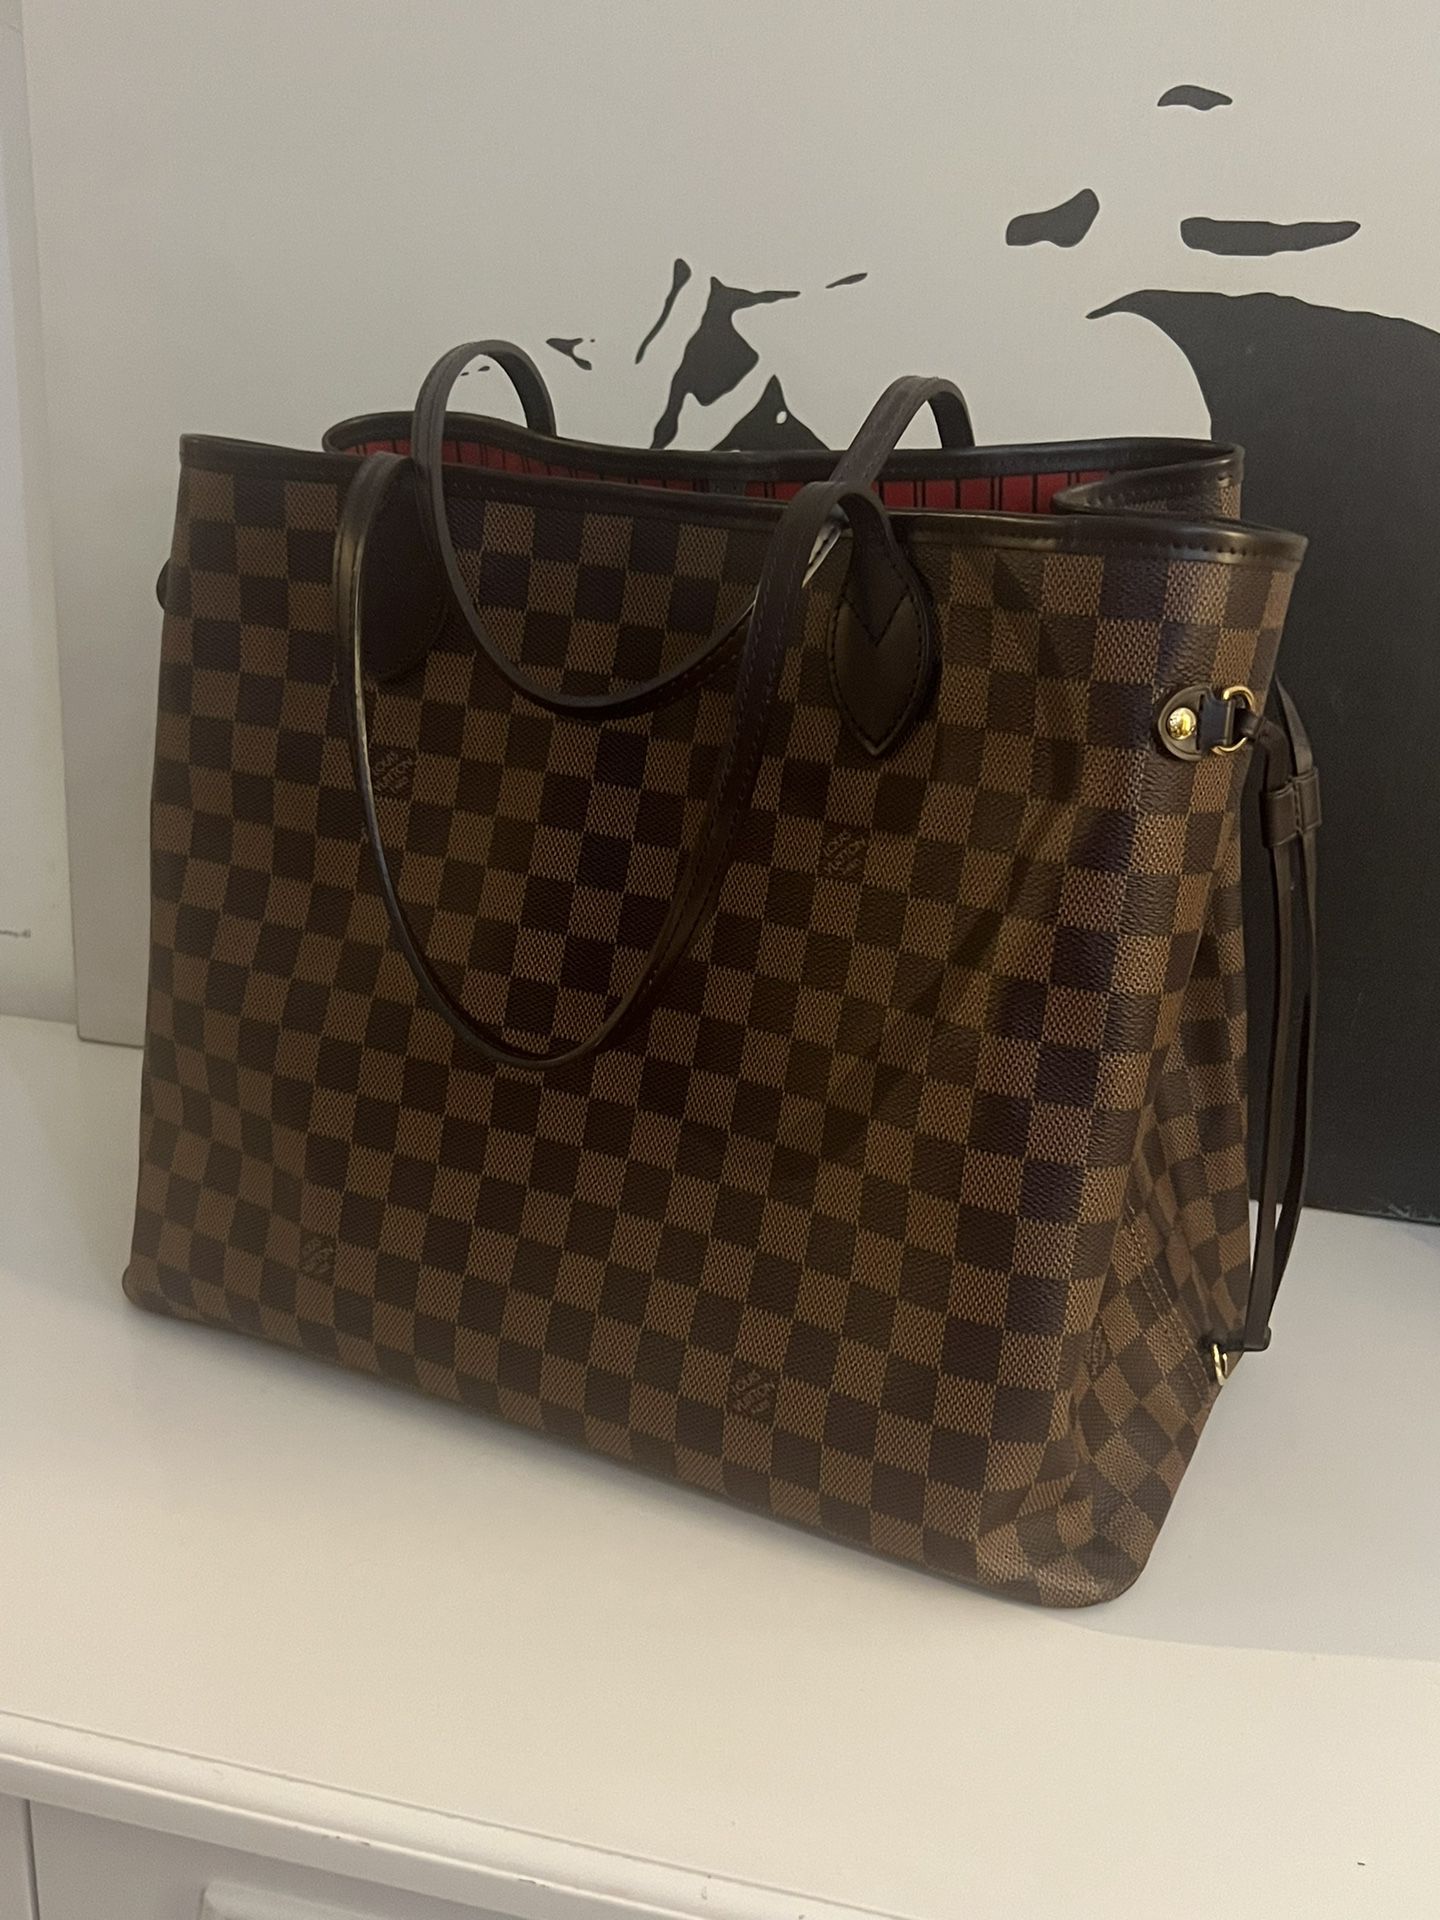 Louis Voitton for Sale in Irwindale, CA - OfferUp